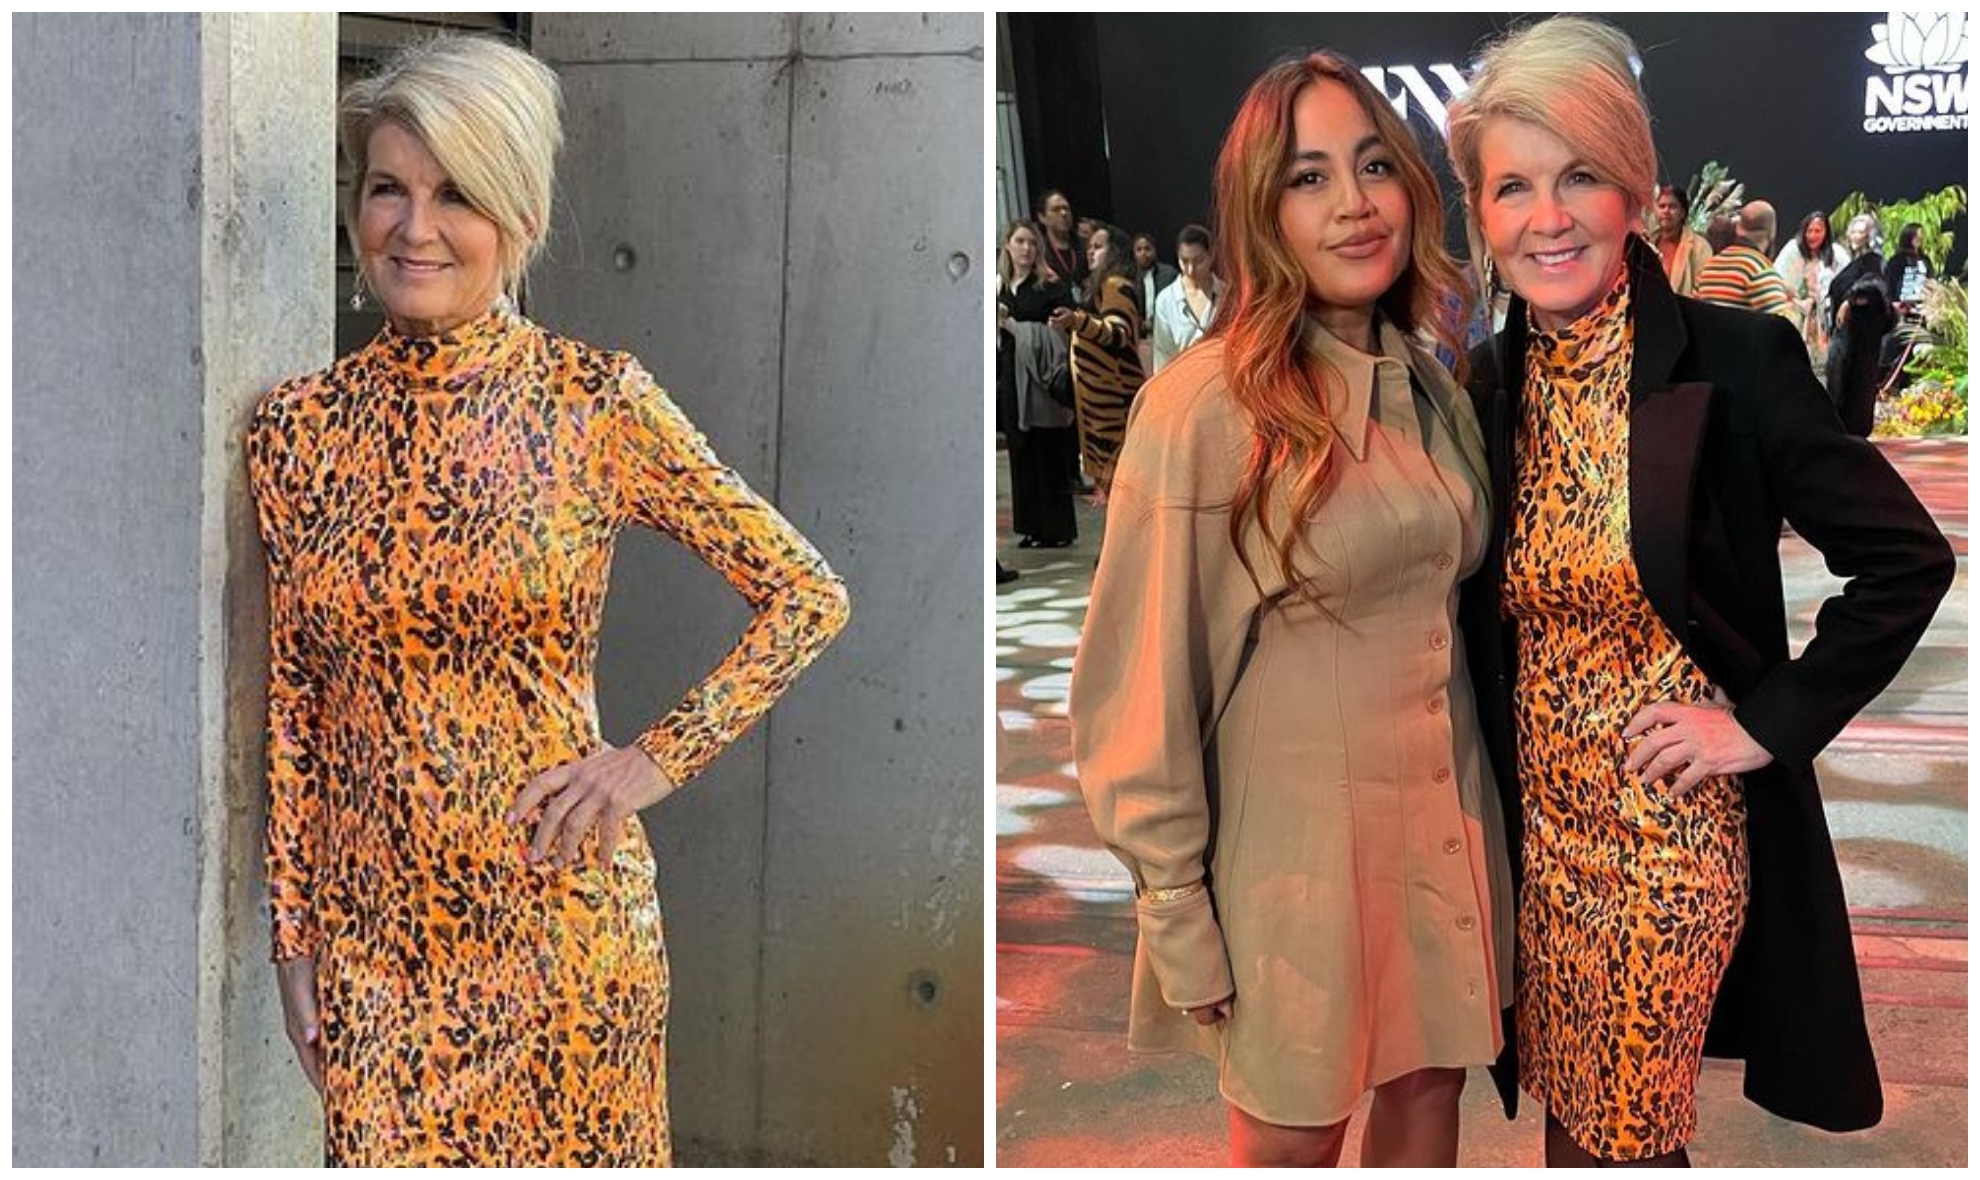 Our first lady of Aussie fashion Julie Bishop, 64, goes ultra glam in an orange leopard print dress at Fashion Week